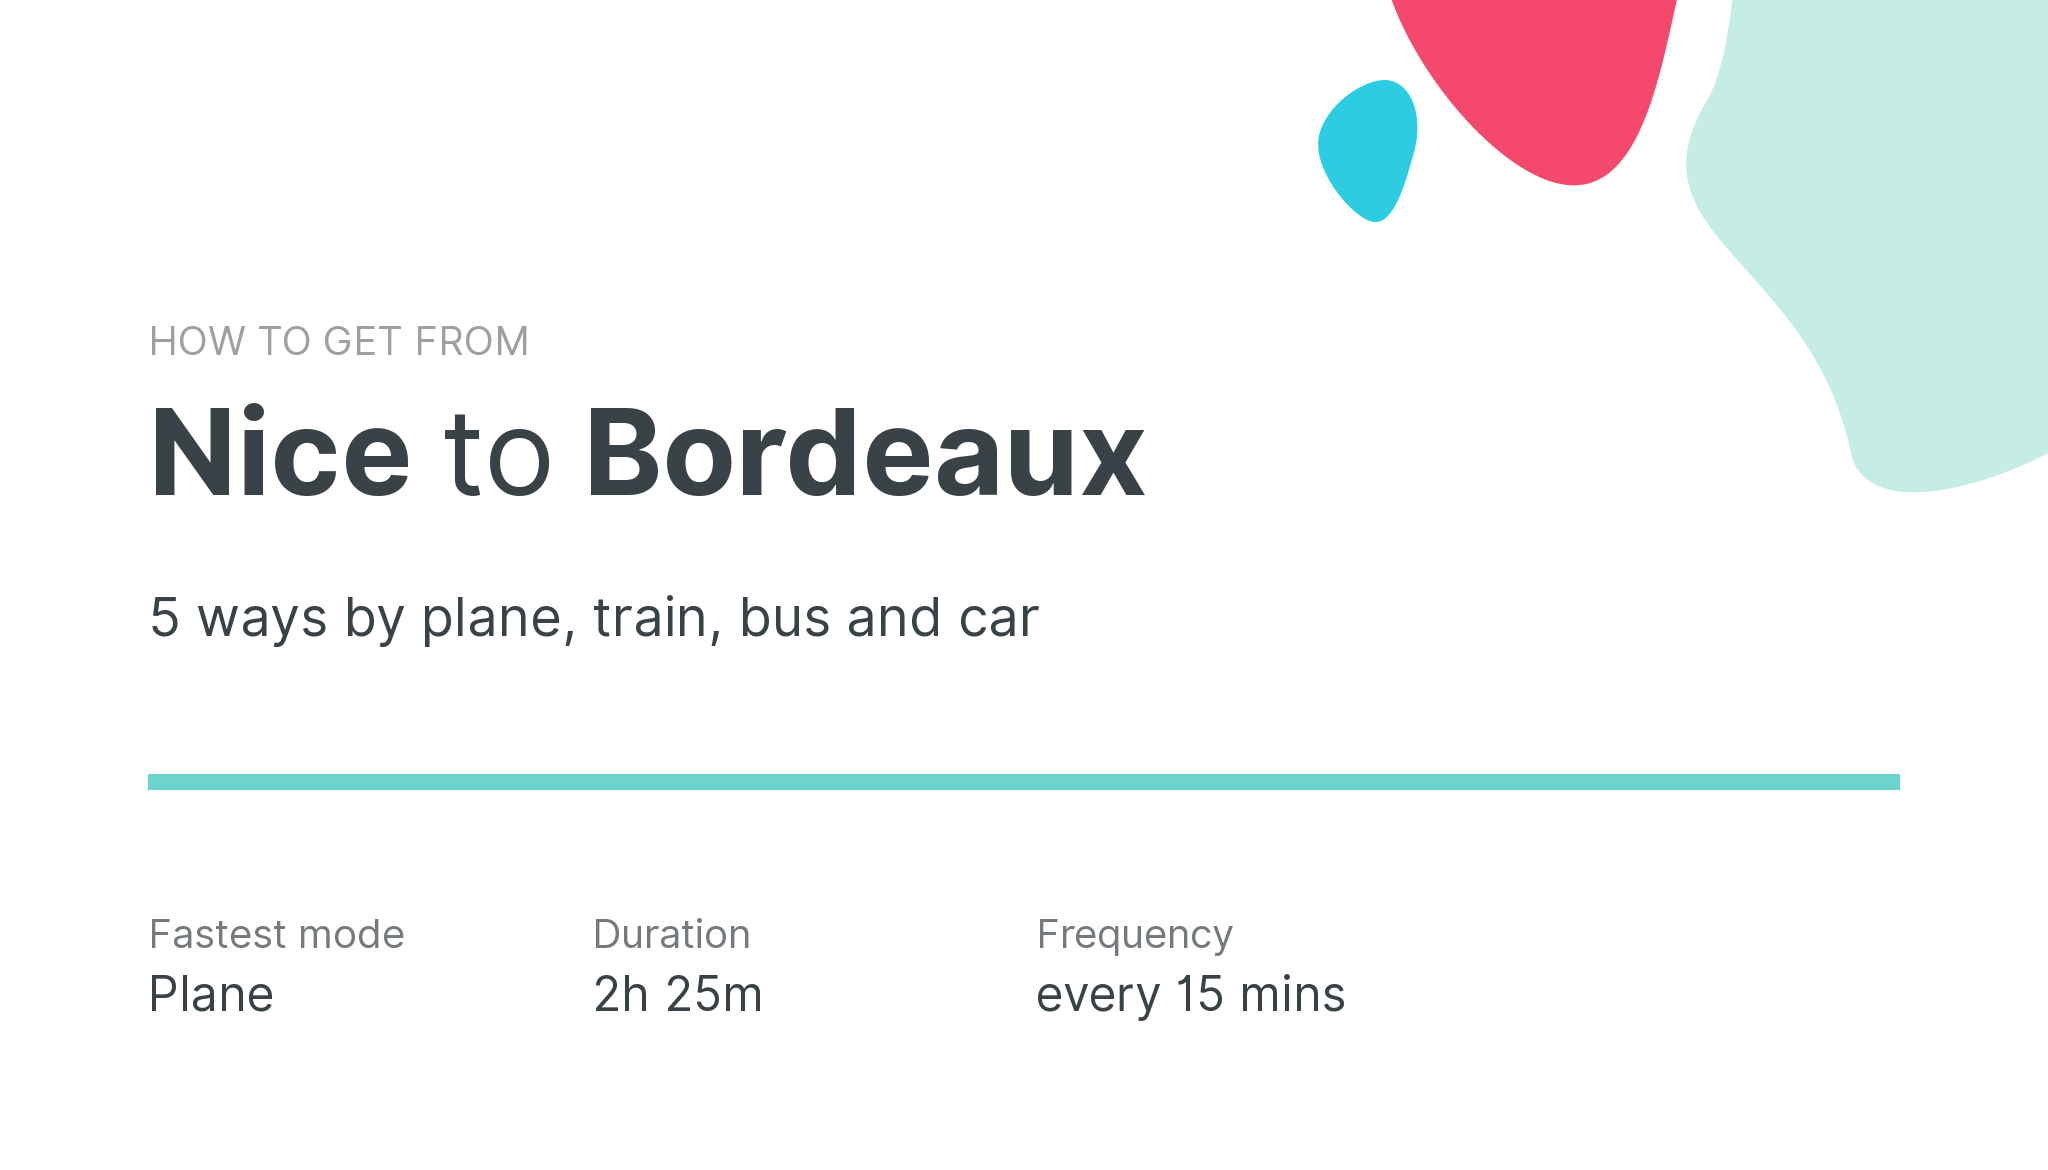 How do I get from Nice to Bordeaux